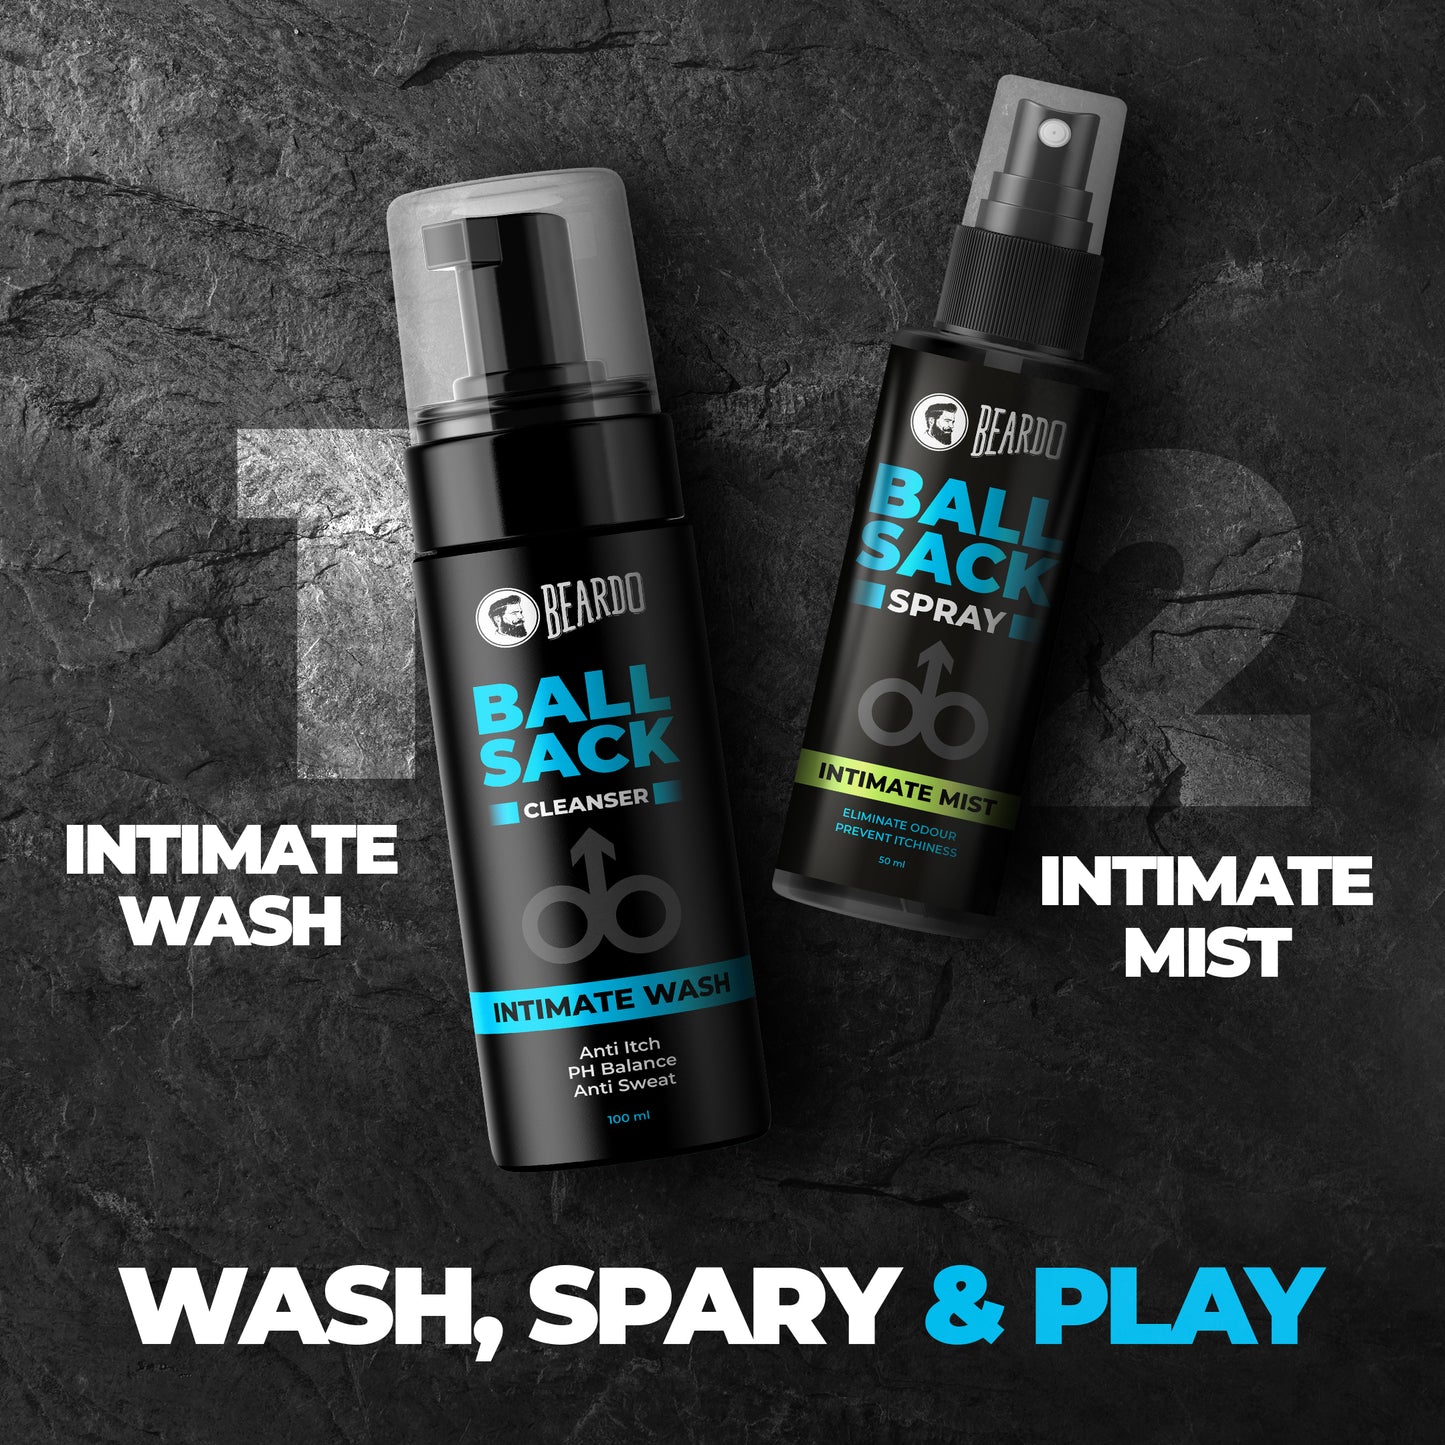 intimate wash for males, intimate wash for boys, intimate wash for men, intimate mist, wash, spray and play, intimate mist men